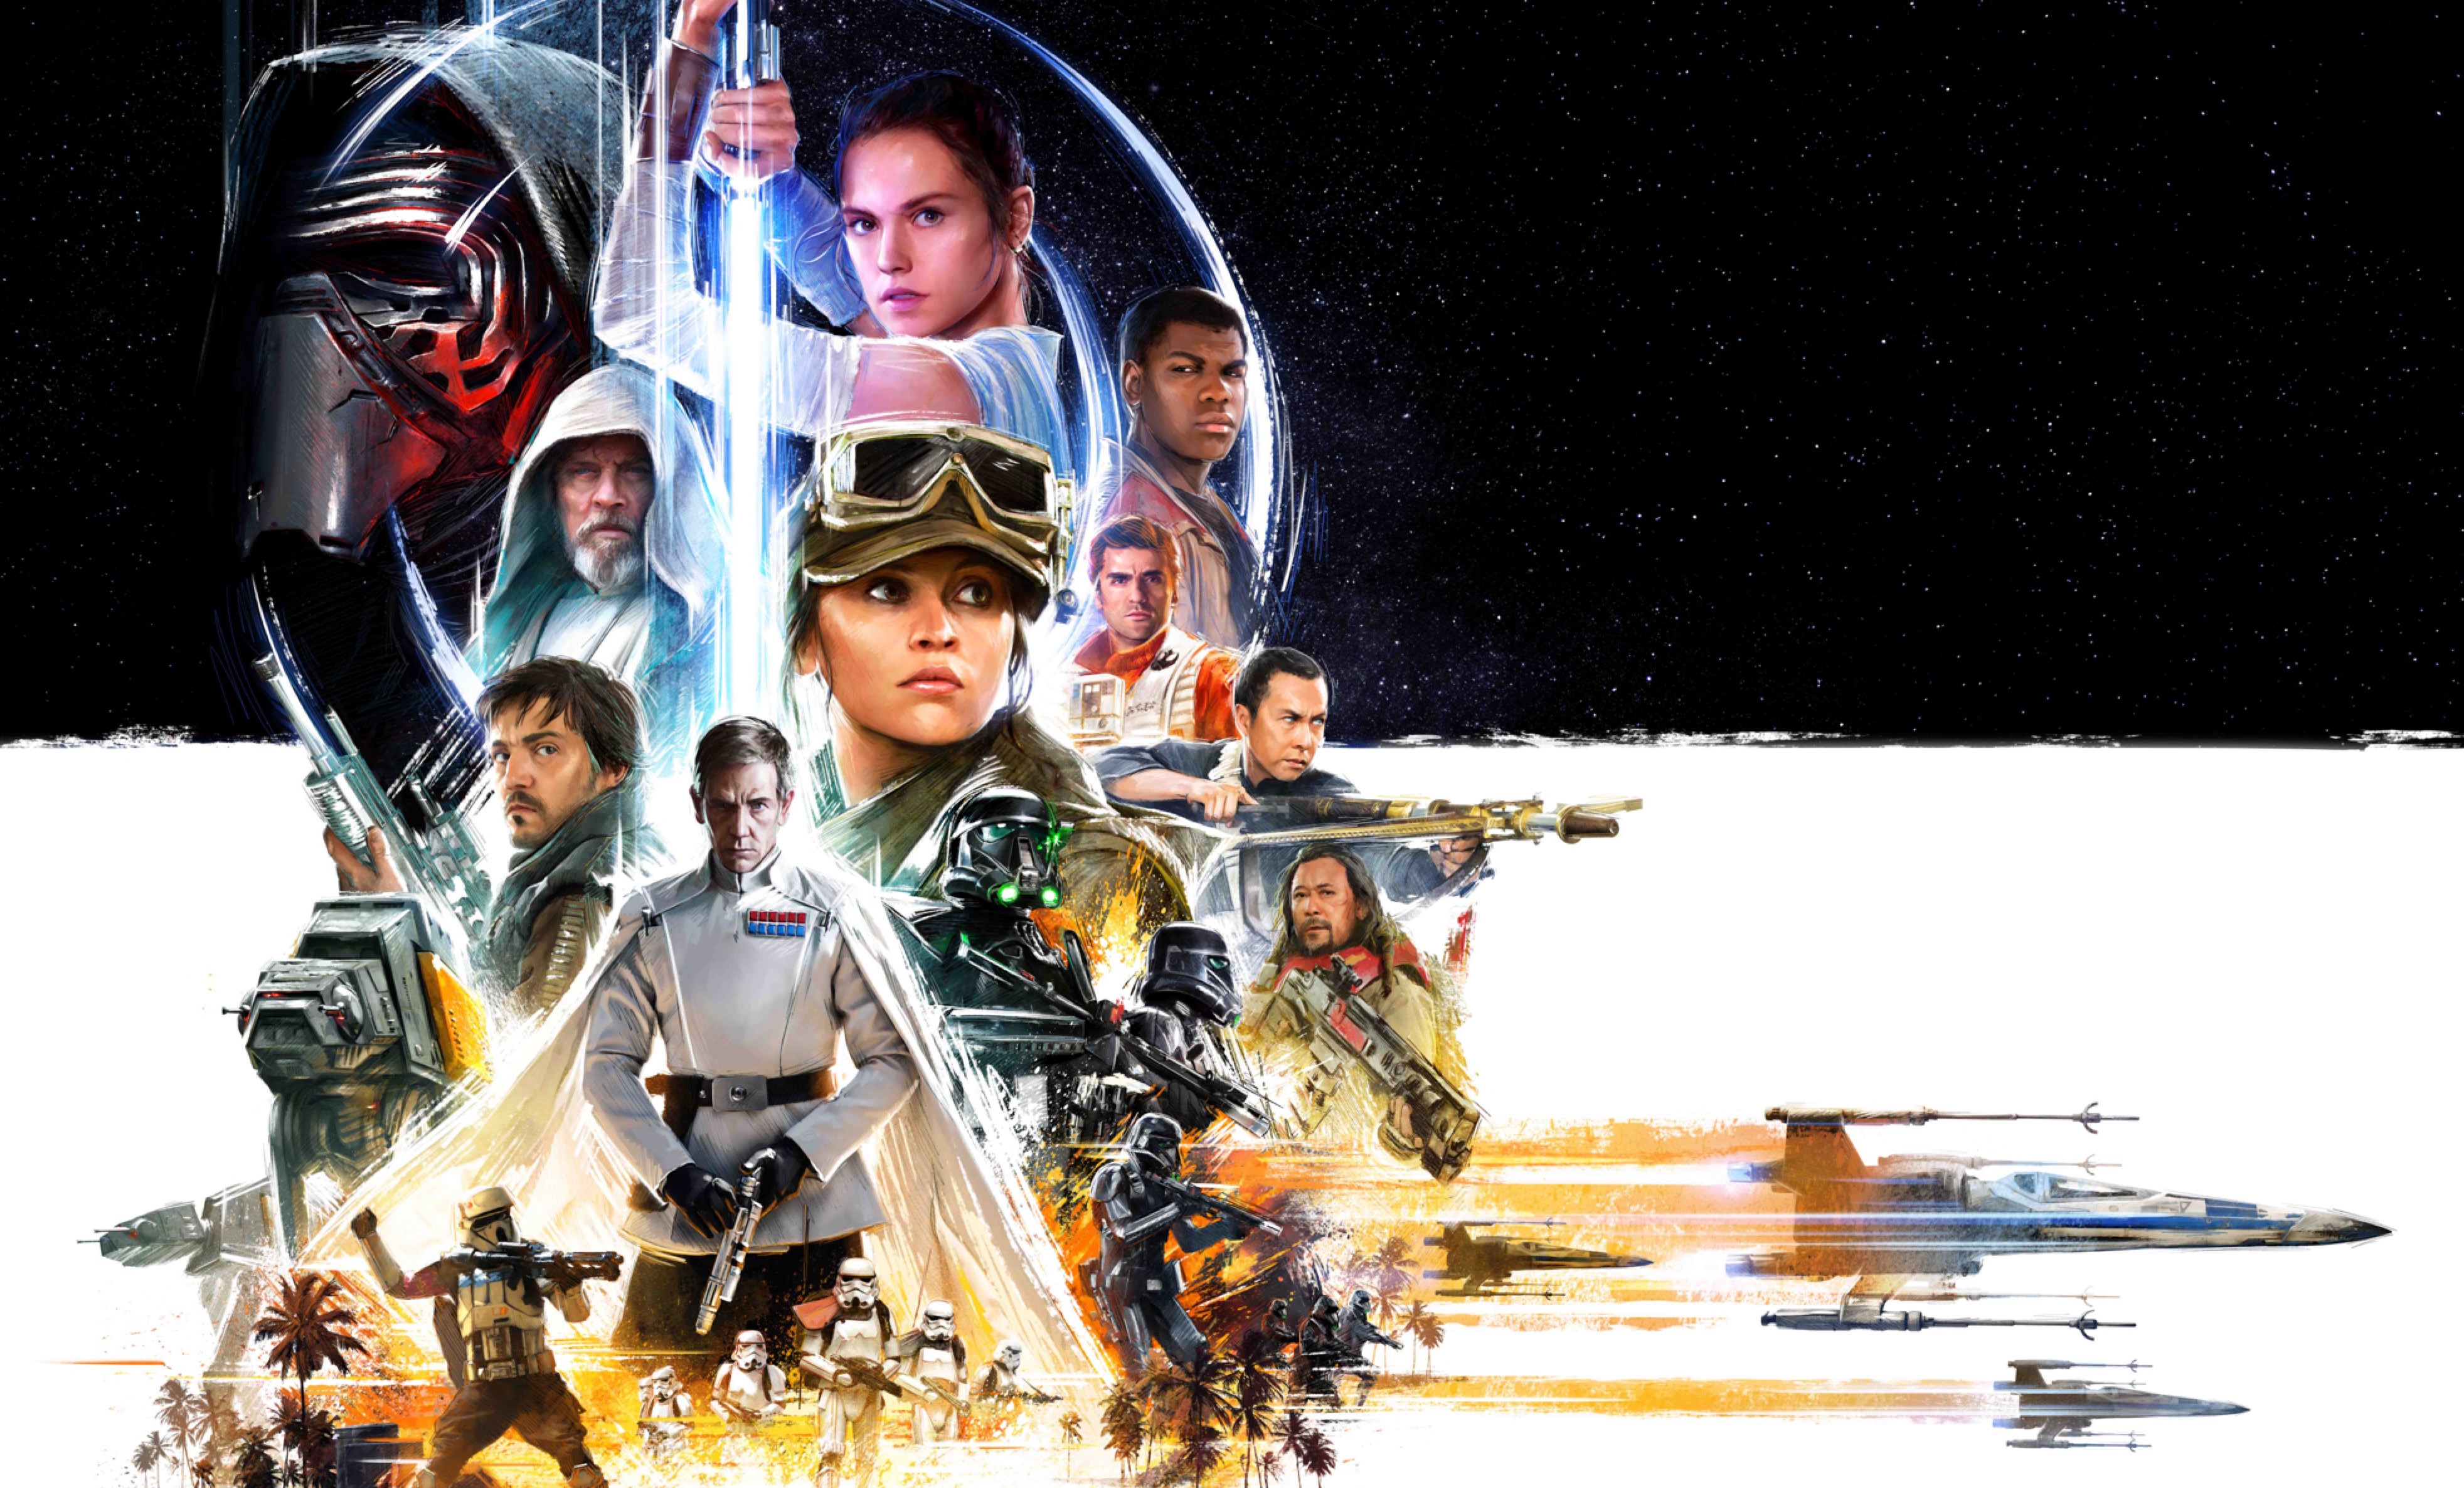 Watch Star Wars Anthology: Rogue One Film Online Full-Length 2016